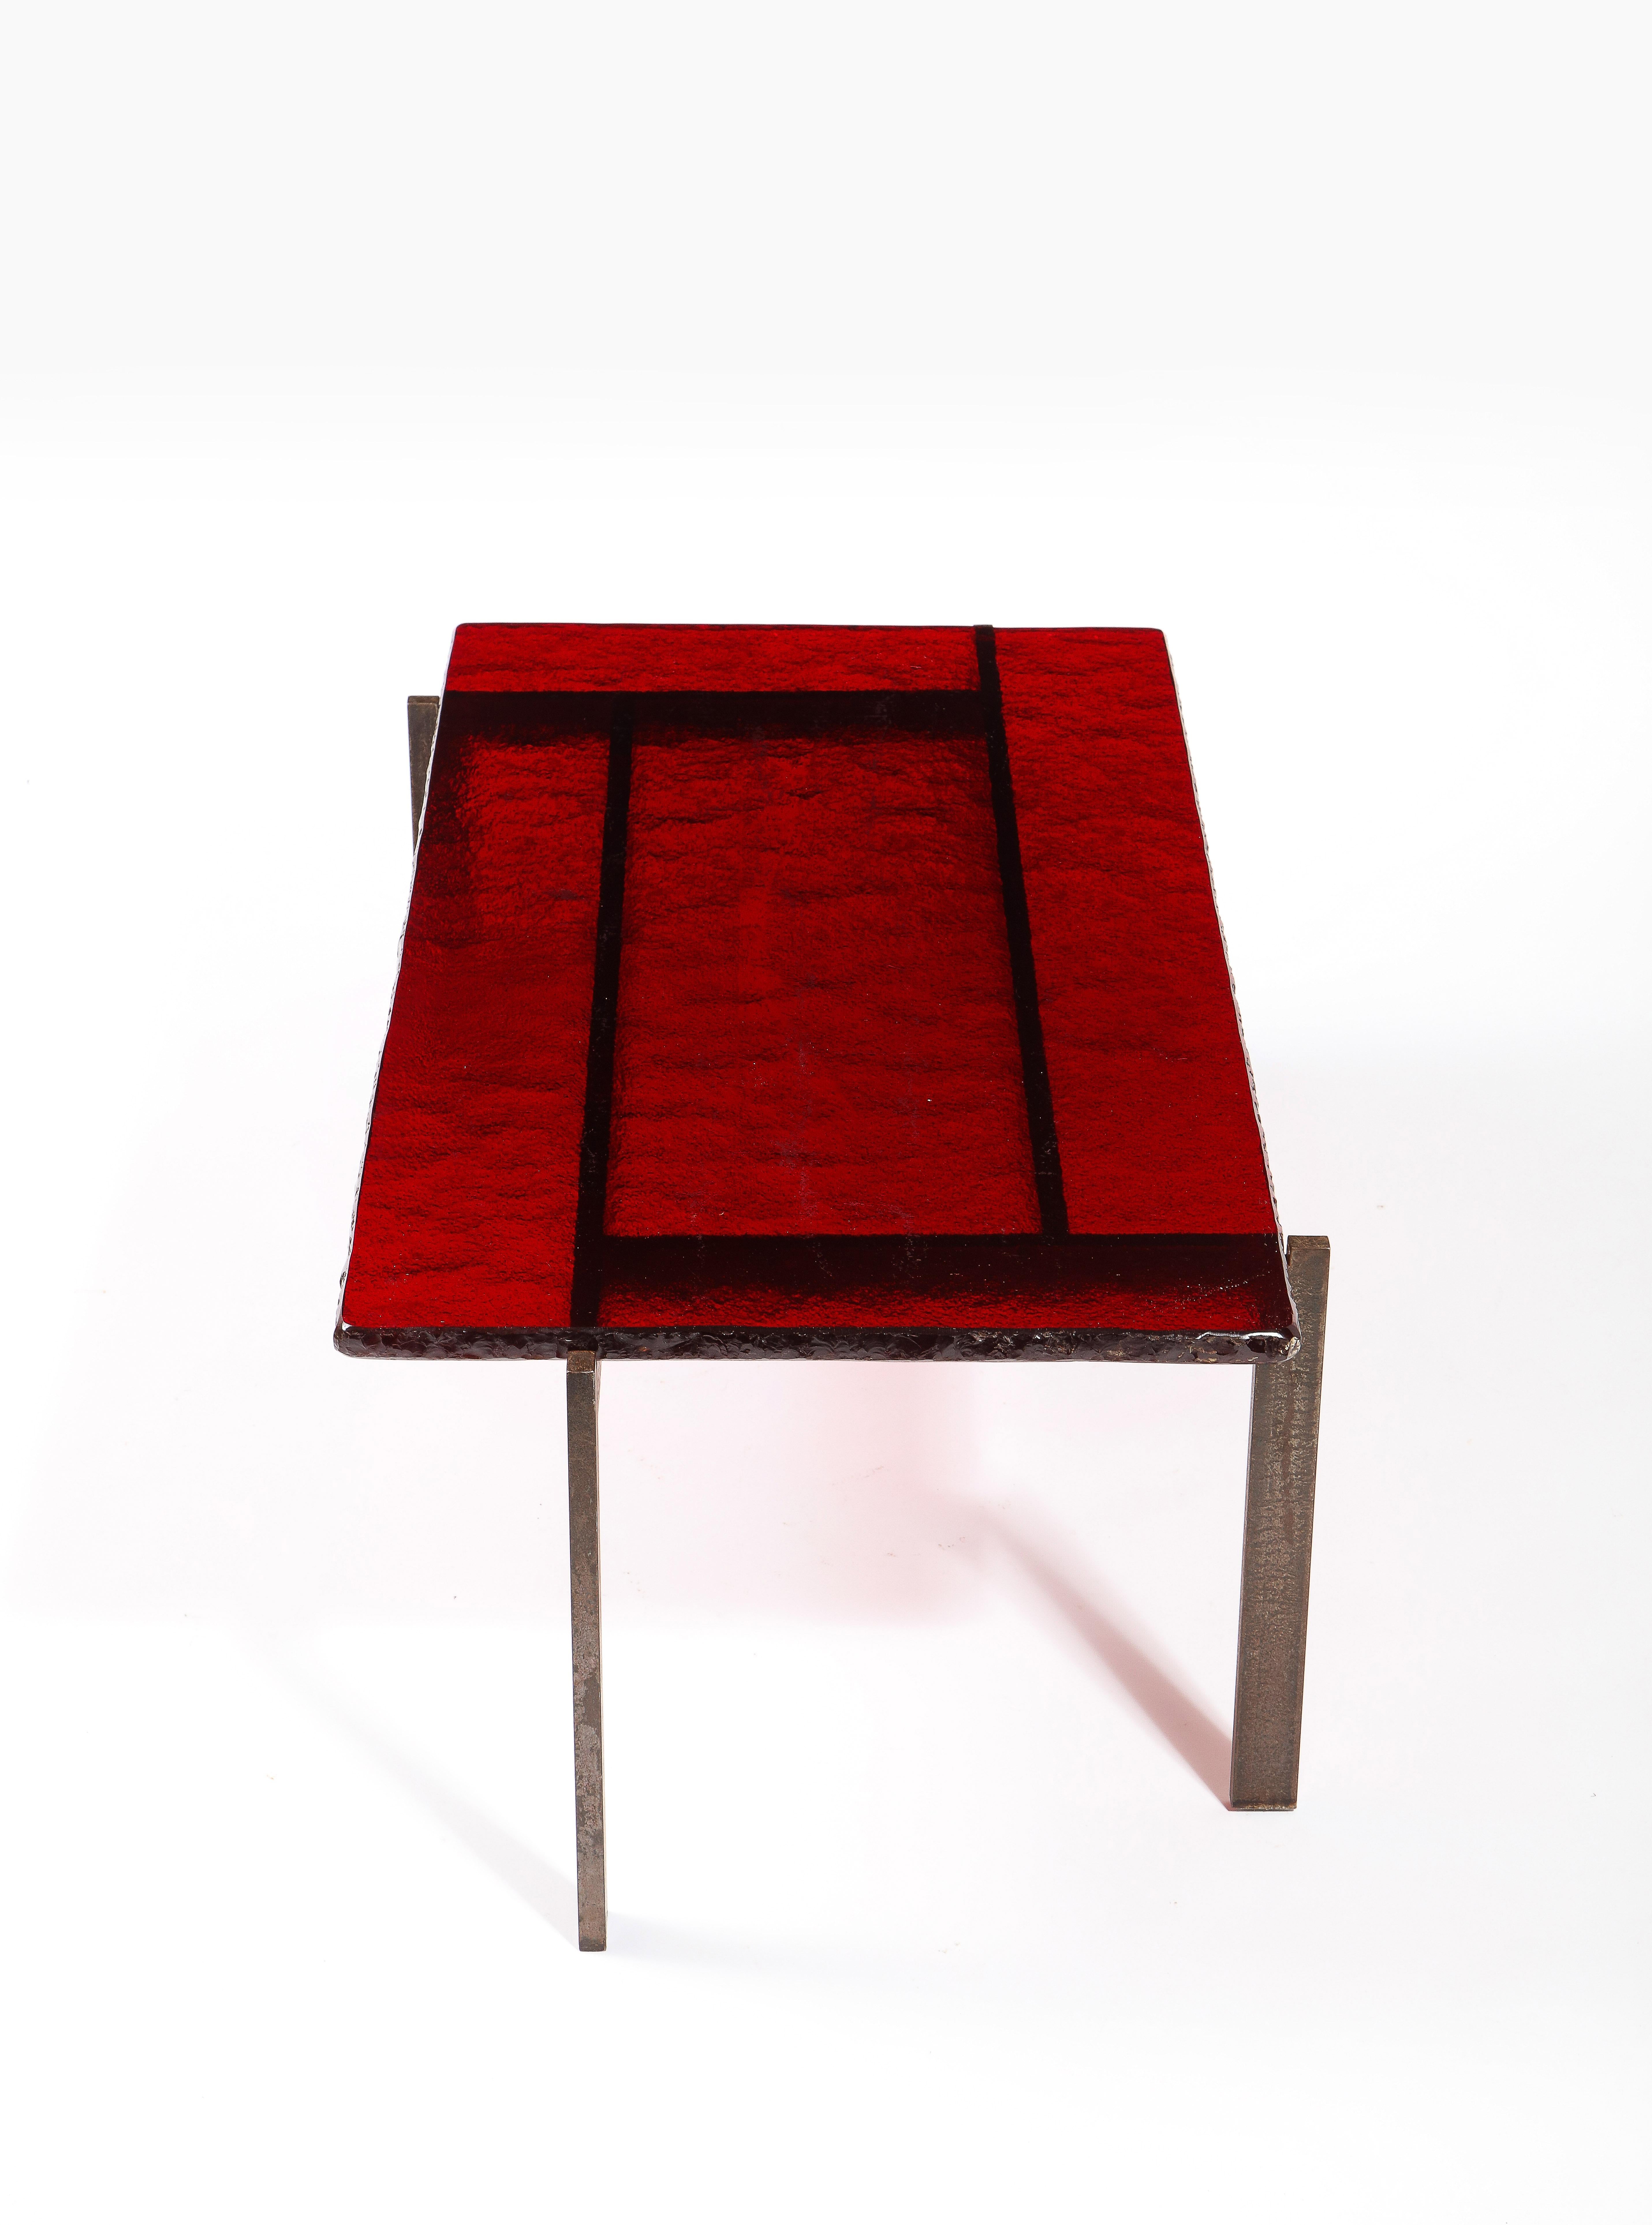 Ruby Red Saint Gobain Glass & Steel Modernist Coffee Table, France 1960's For Sale 6